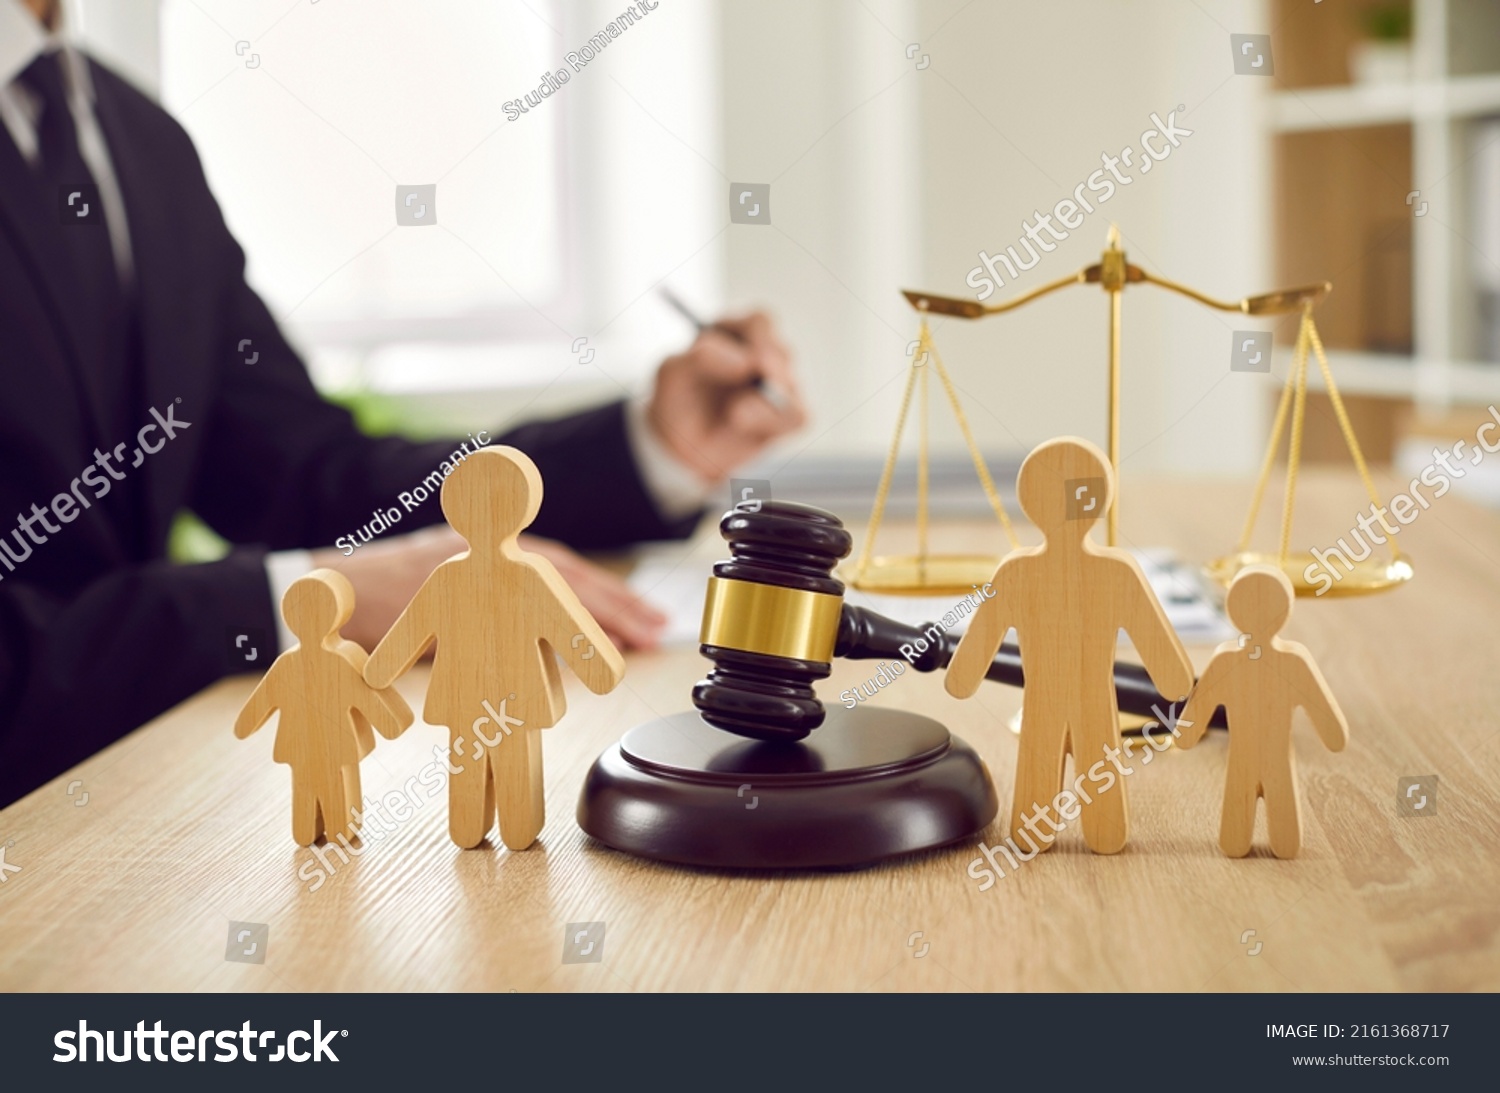 Gavel, sound block and little wooden figures of parents and children placed on desk in courthouse up close, judge and scales of justice in background. Family law, court, divorce, child custody concept #2161368717